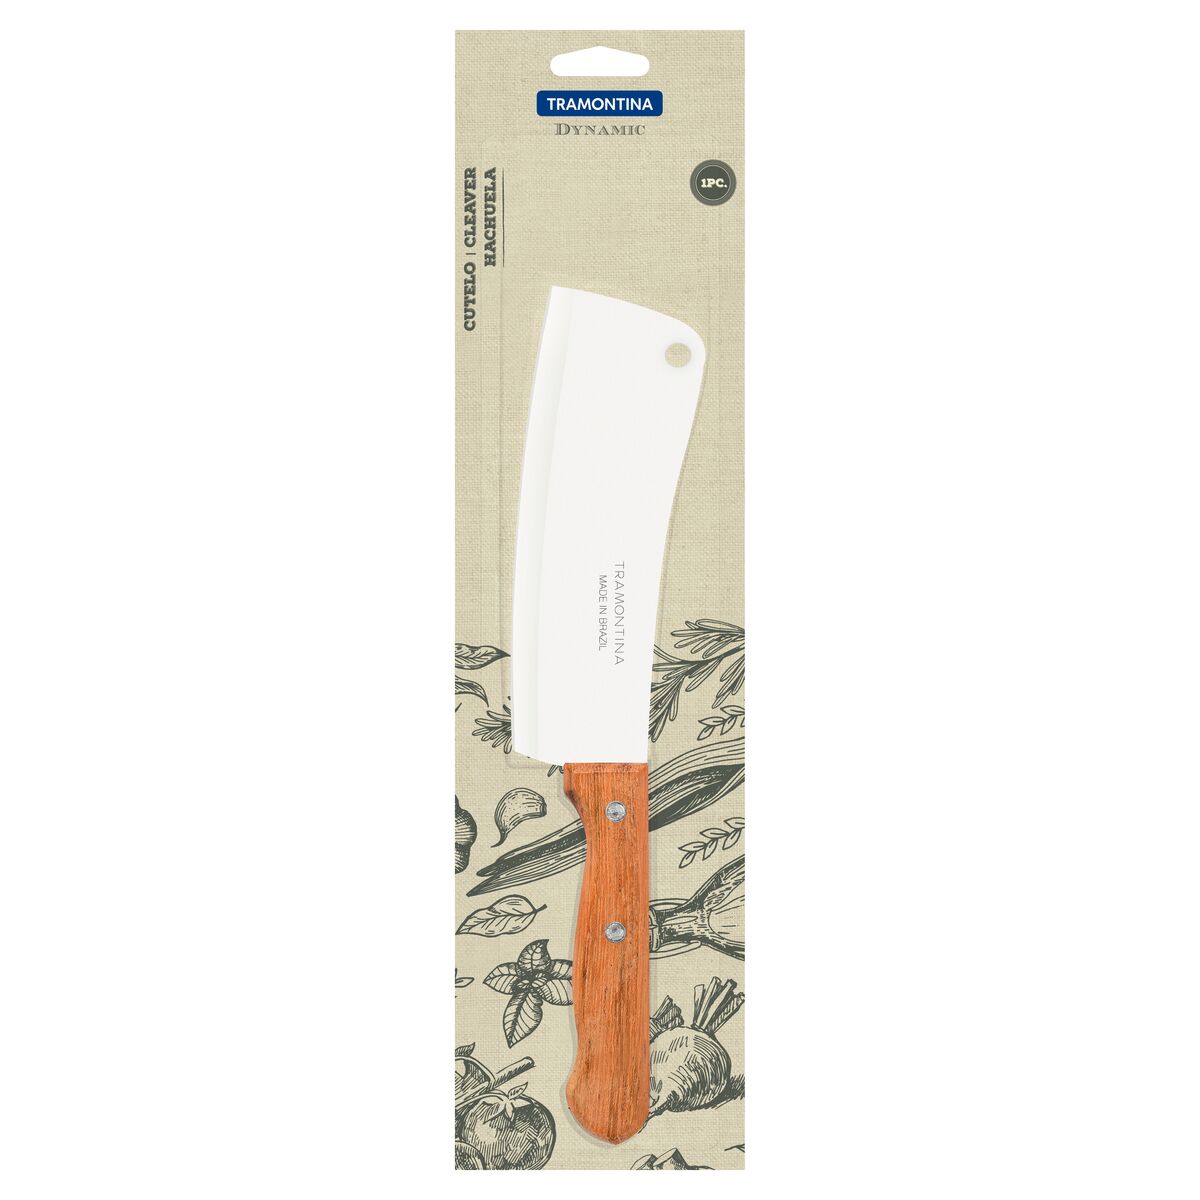 Tramontina Cleaver Knife 6" - 22319/106